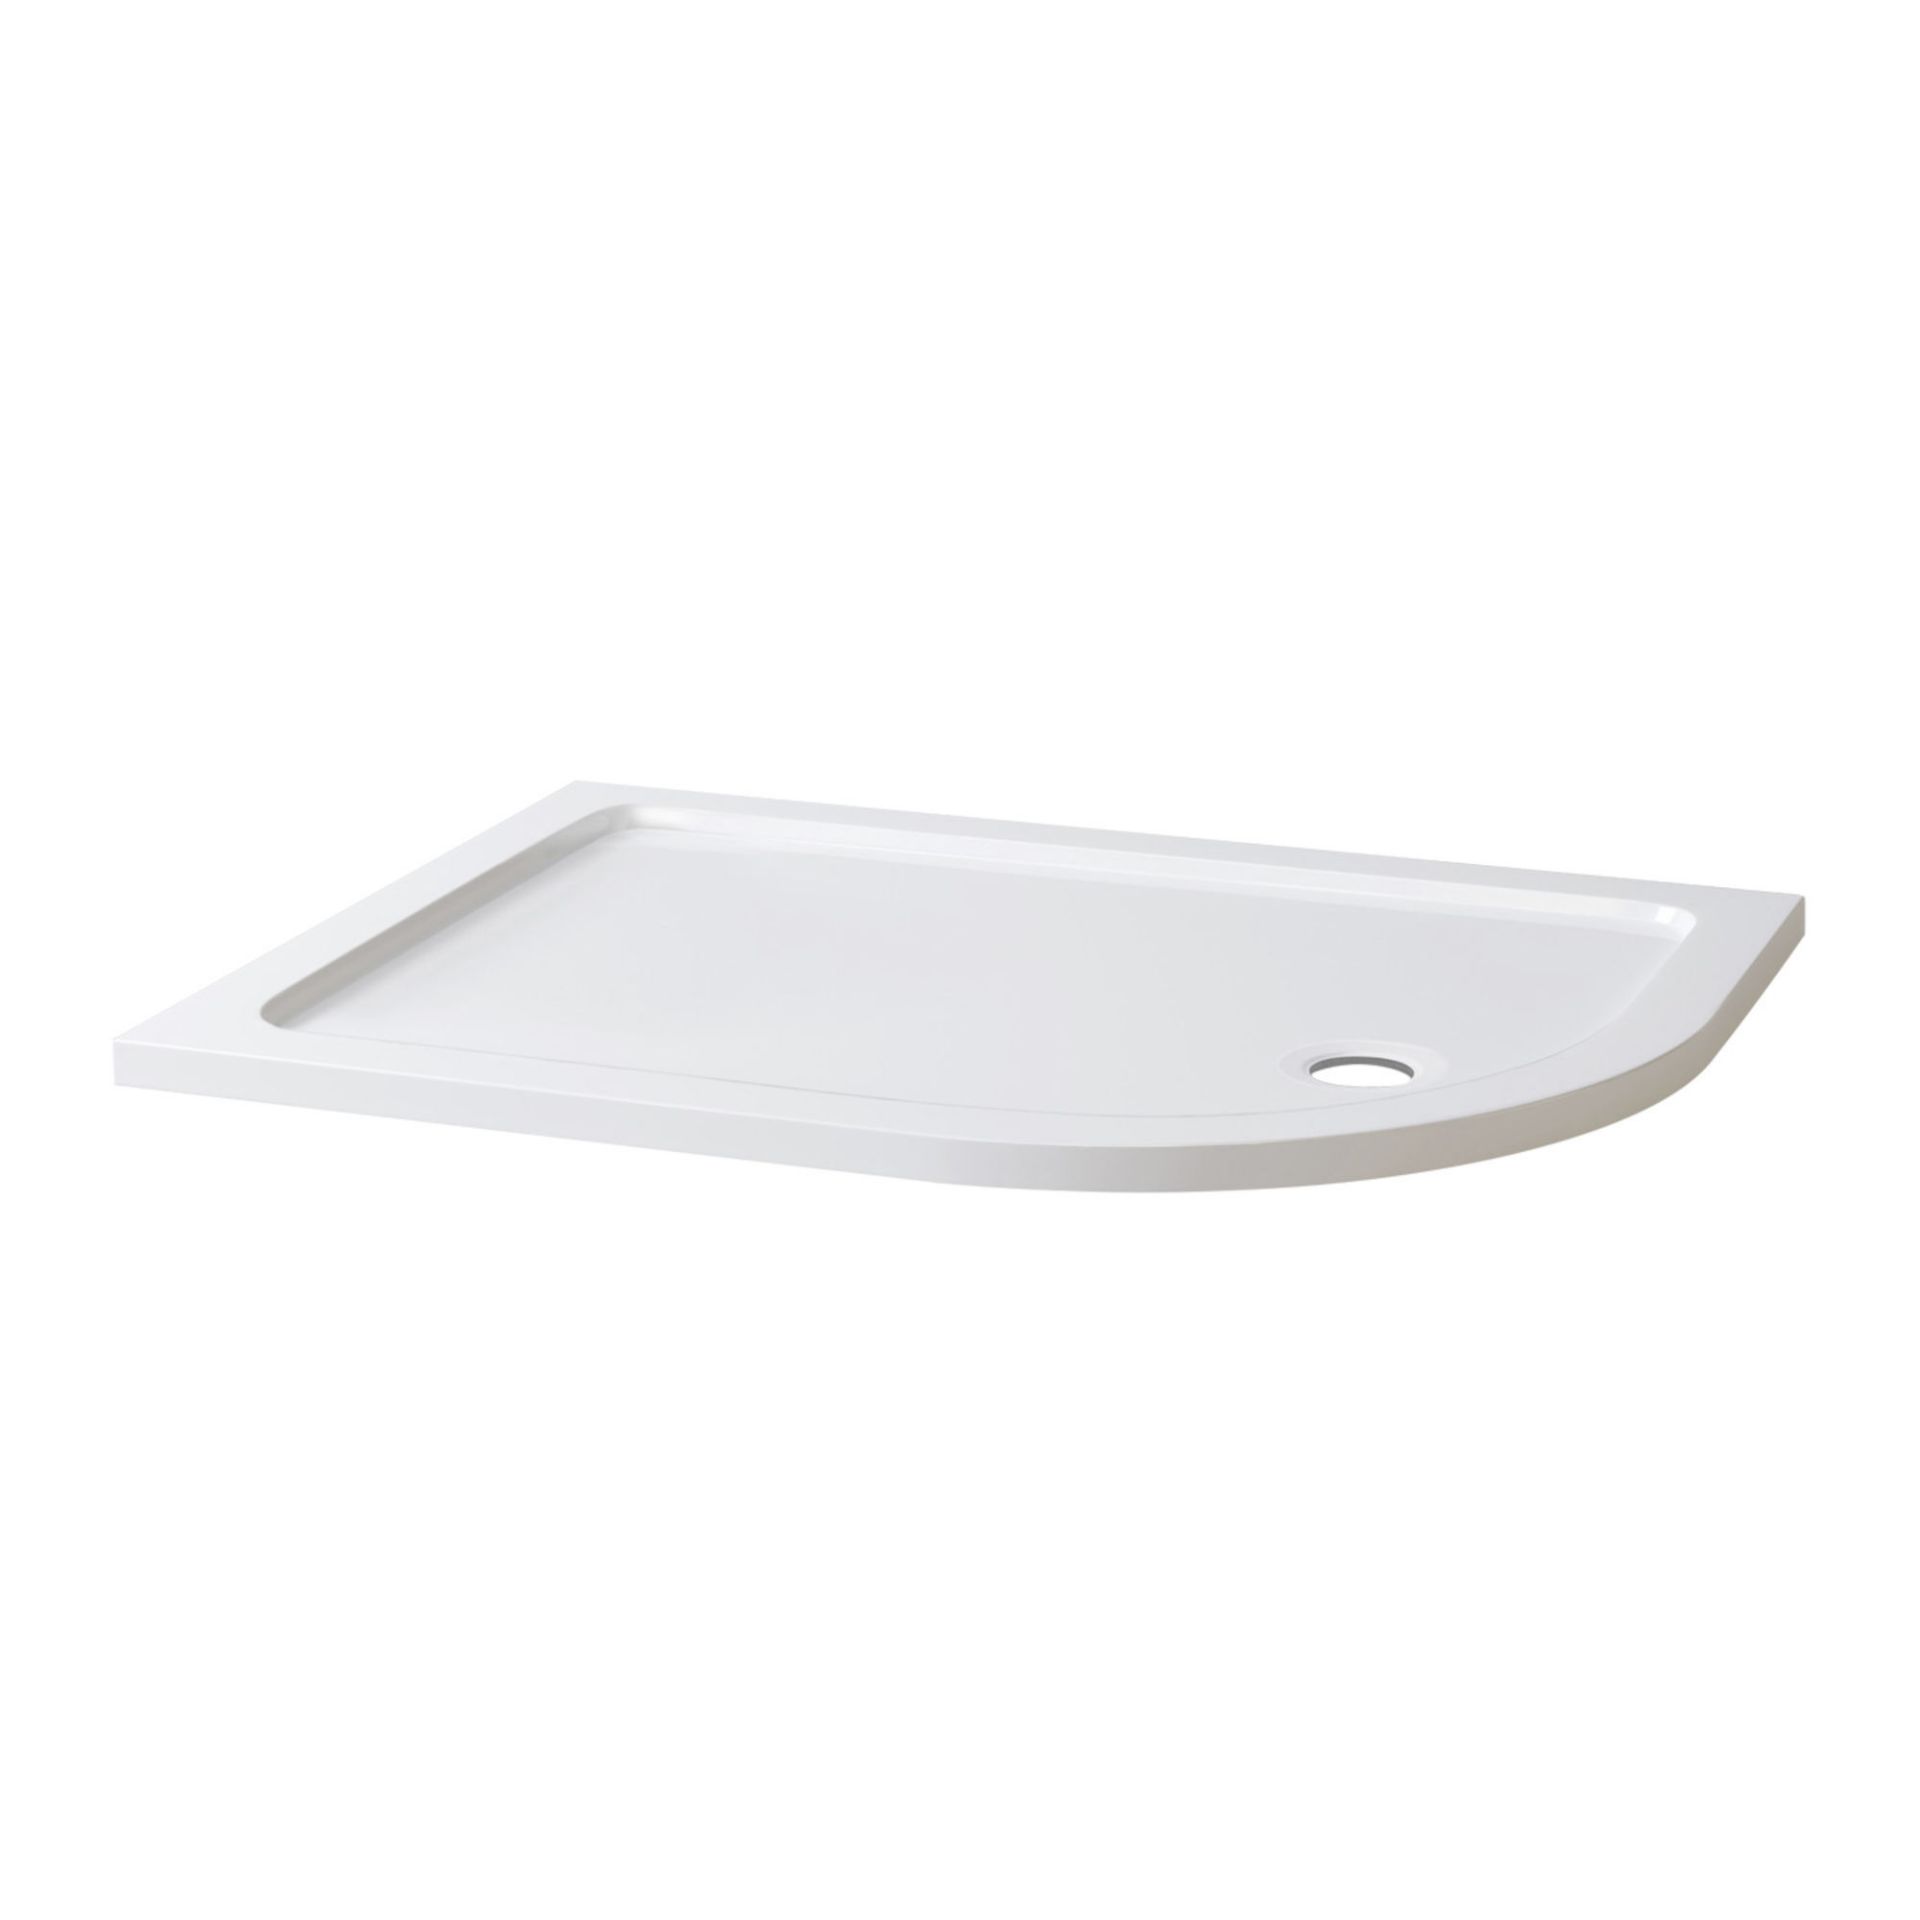 (AD54) 1200x900mm Offset Quadrant Ultra Slim Stone Shower Tray - Right. RRP £234.99. Low - Image 3 of 4